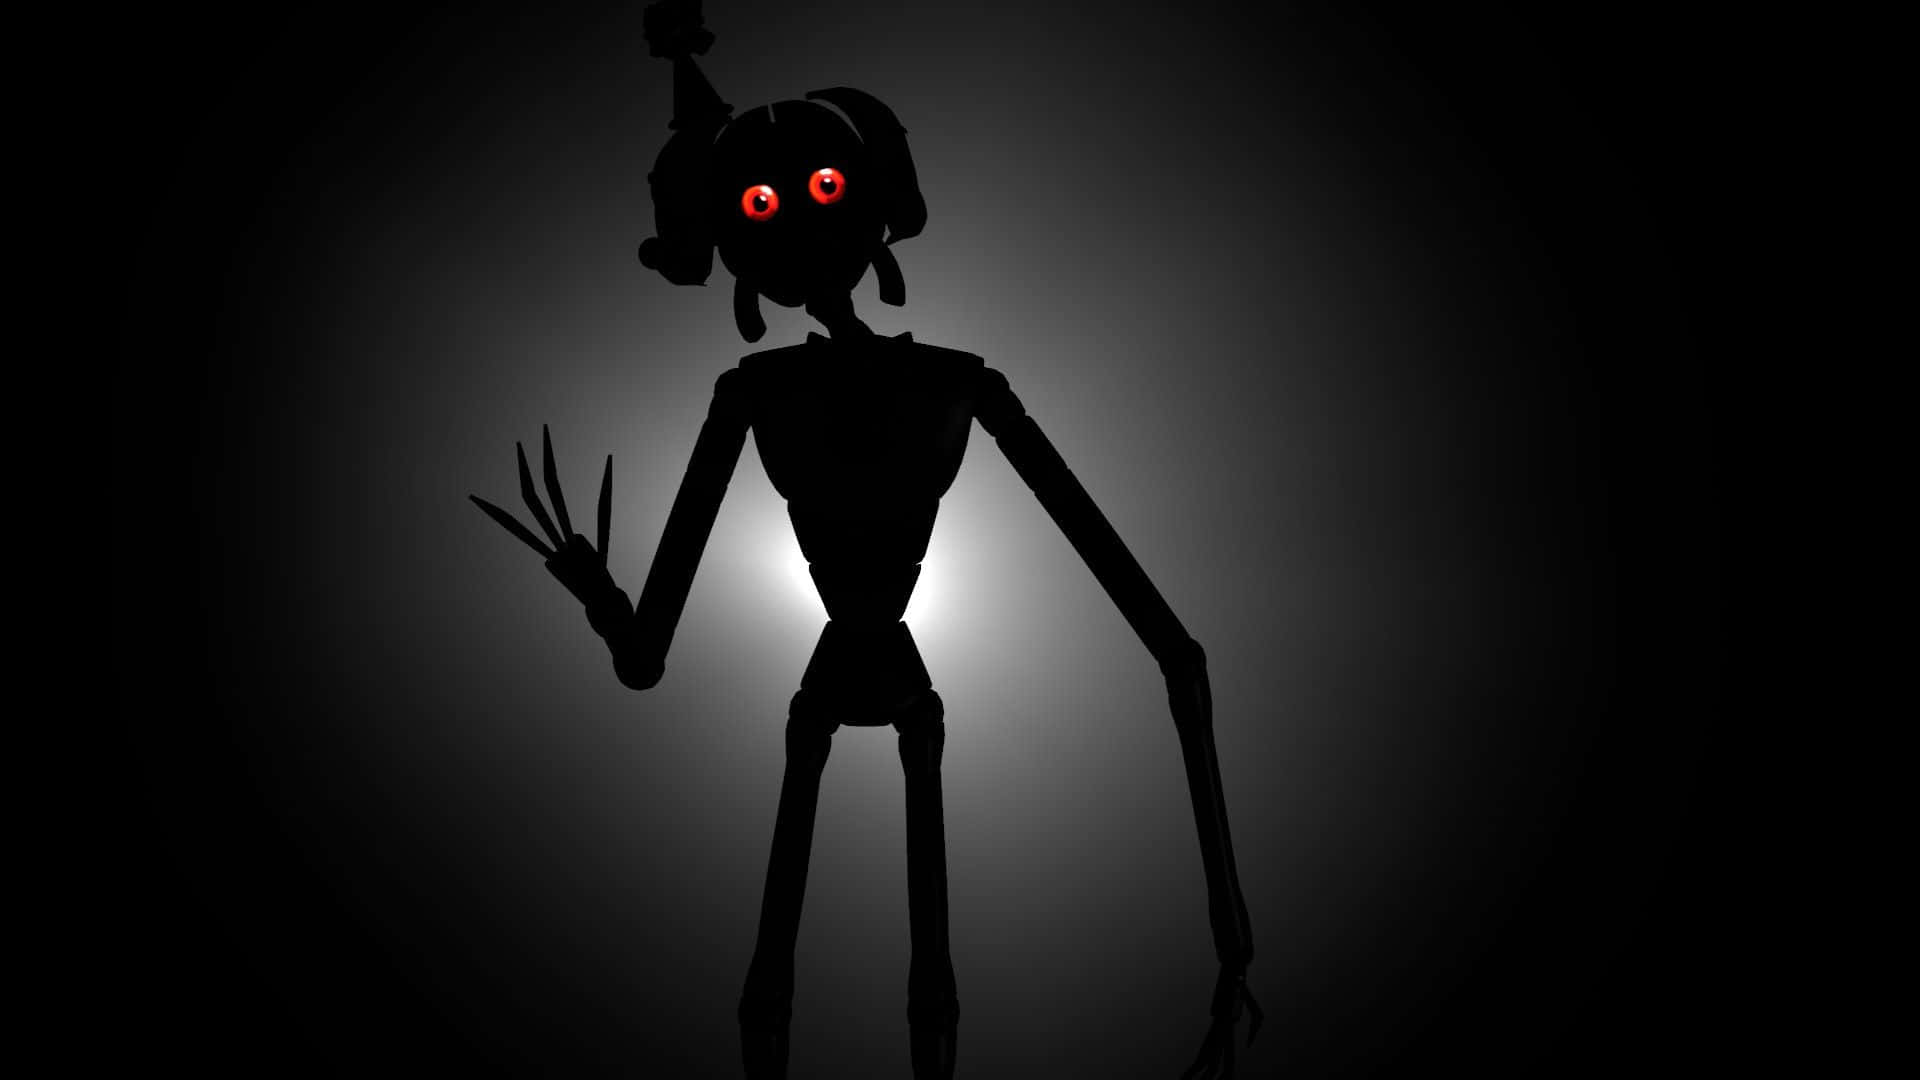 Stream Animatronics song (Five nights at Freddy's) by Circus Ennard